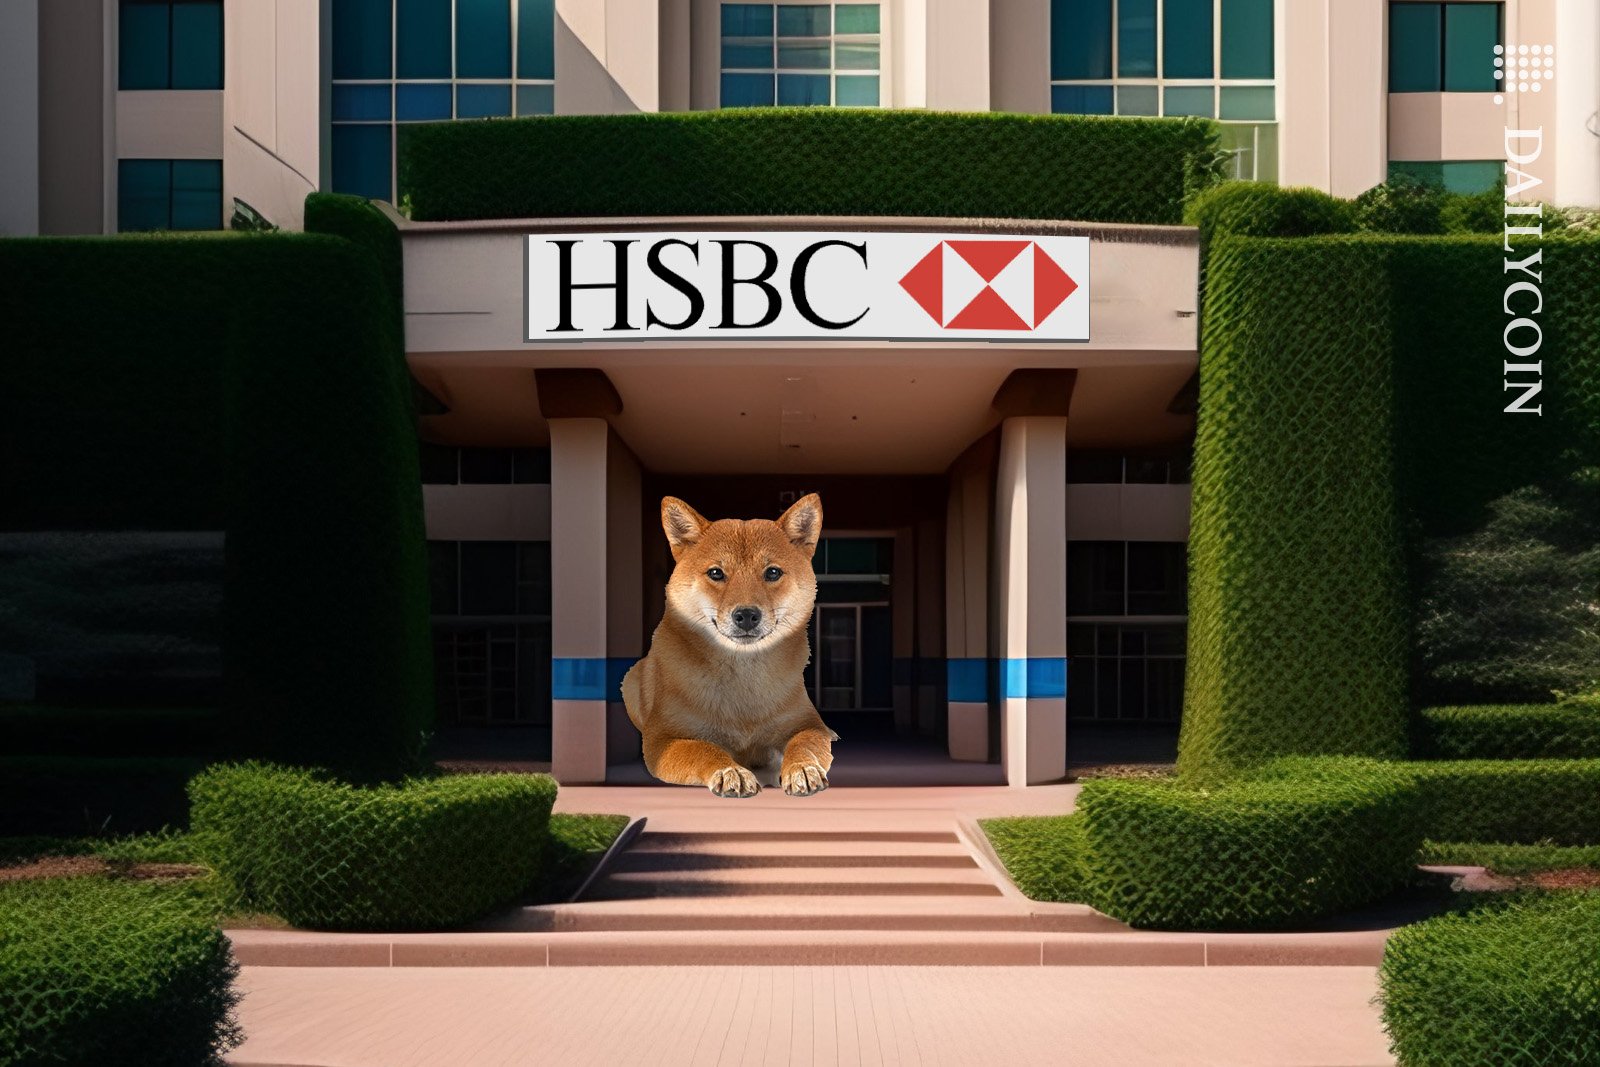 Shiba inu sitting comfortably by the entrance of a HSBC bank.